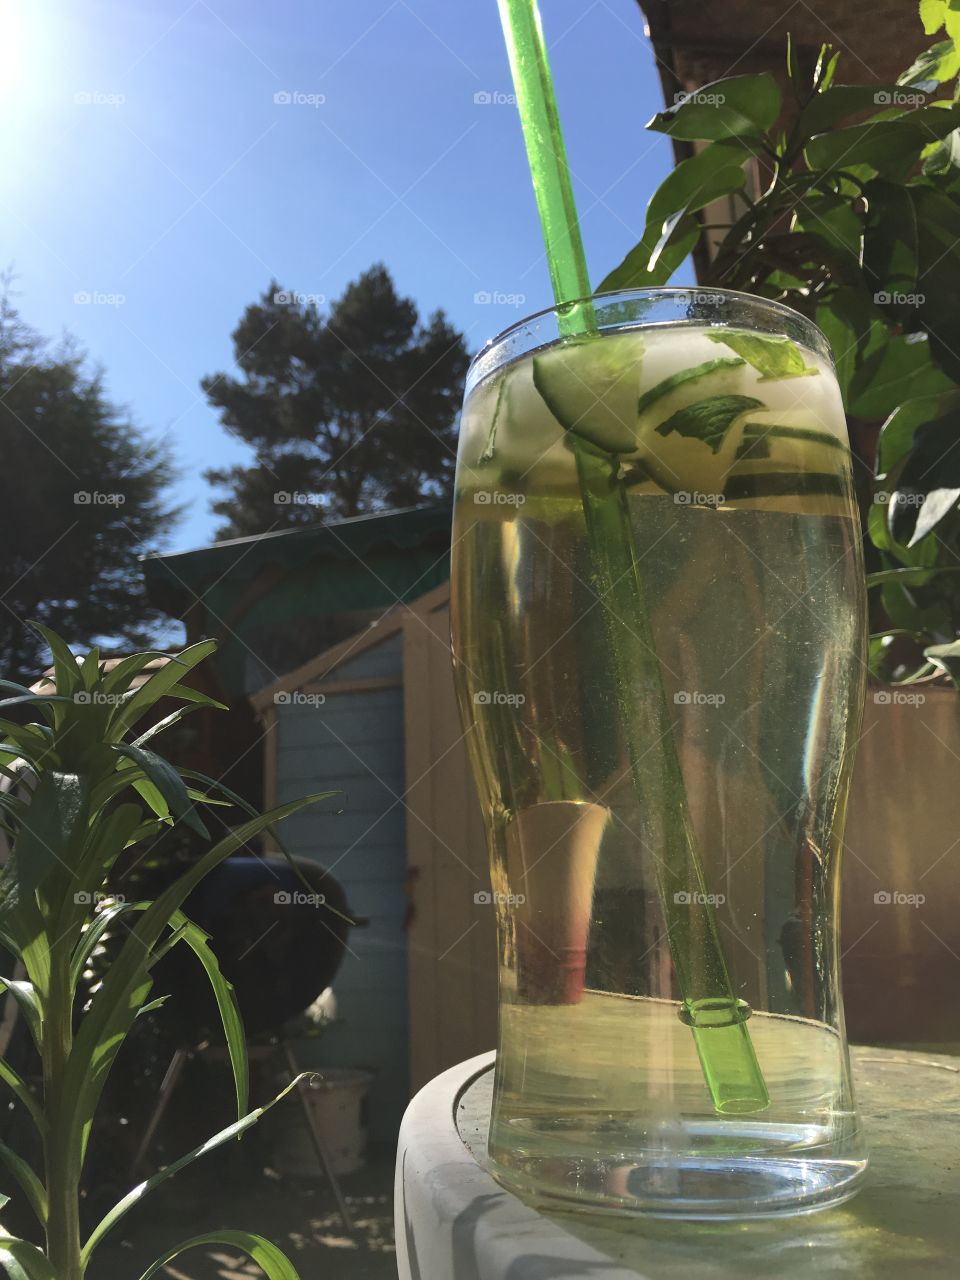 Elderflower fizz drink with cucumber, mint leaves and ice in a glass on a table in the garden sign lily plant, stephanotis plant, pine trees and garden shed in background 